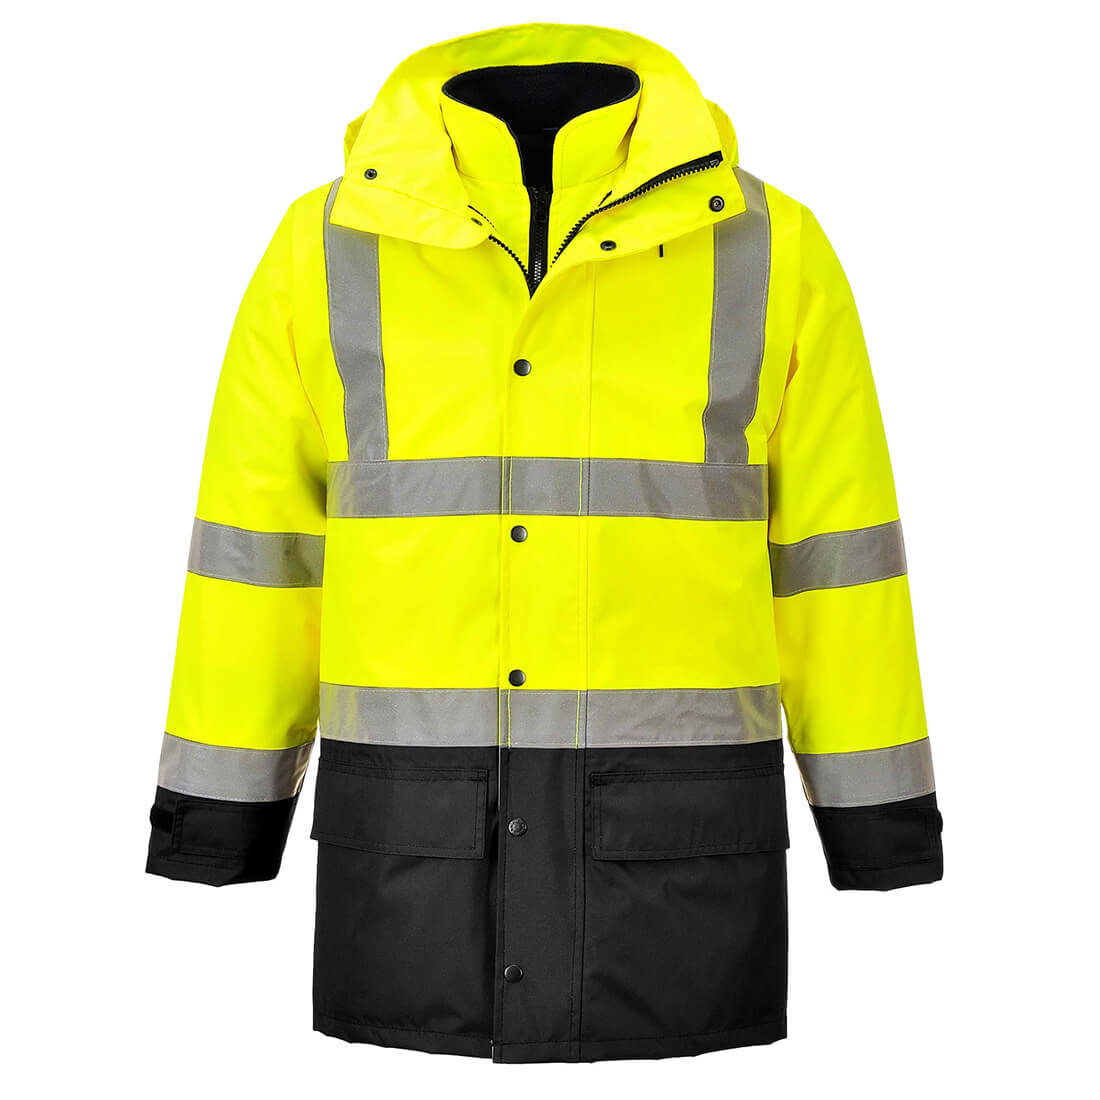 Photo of Oxford Weave 300d Class 3 Hi Vis 5-in1 Executive Jacket Yellow / Black 4xl